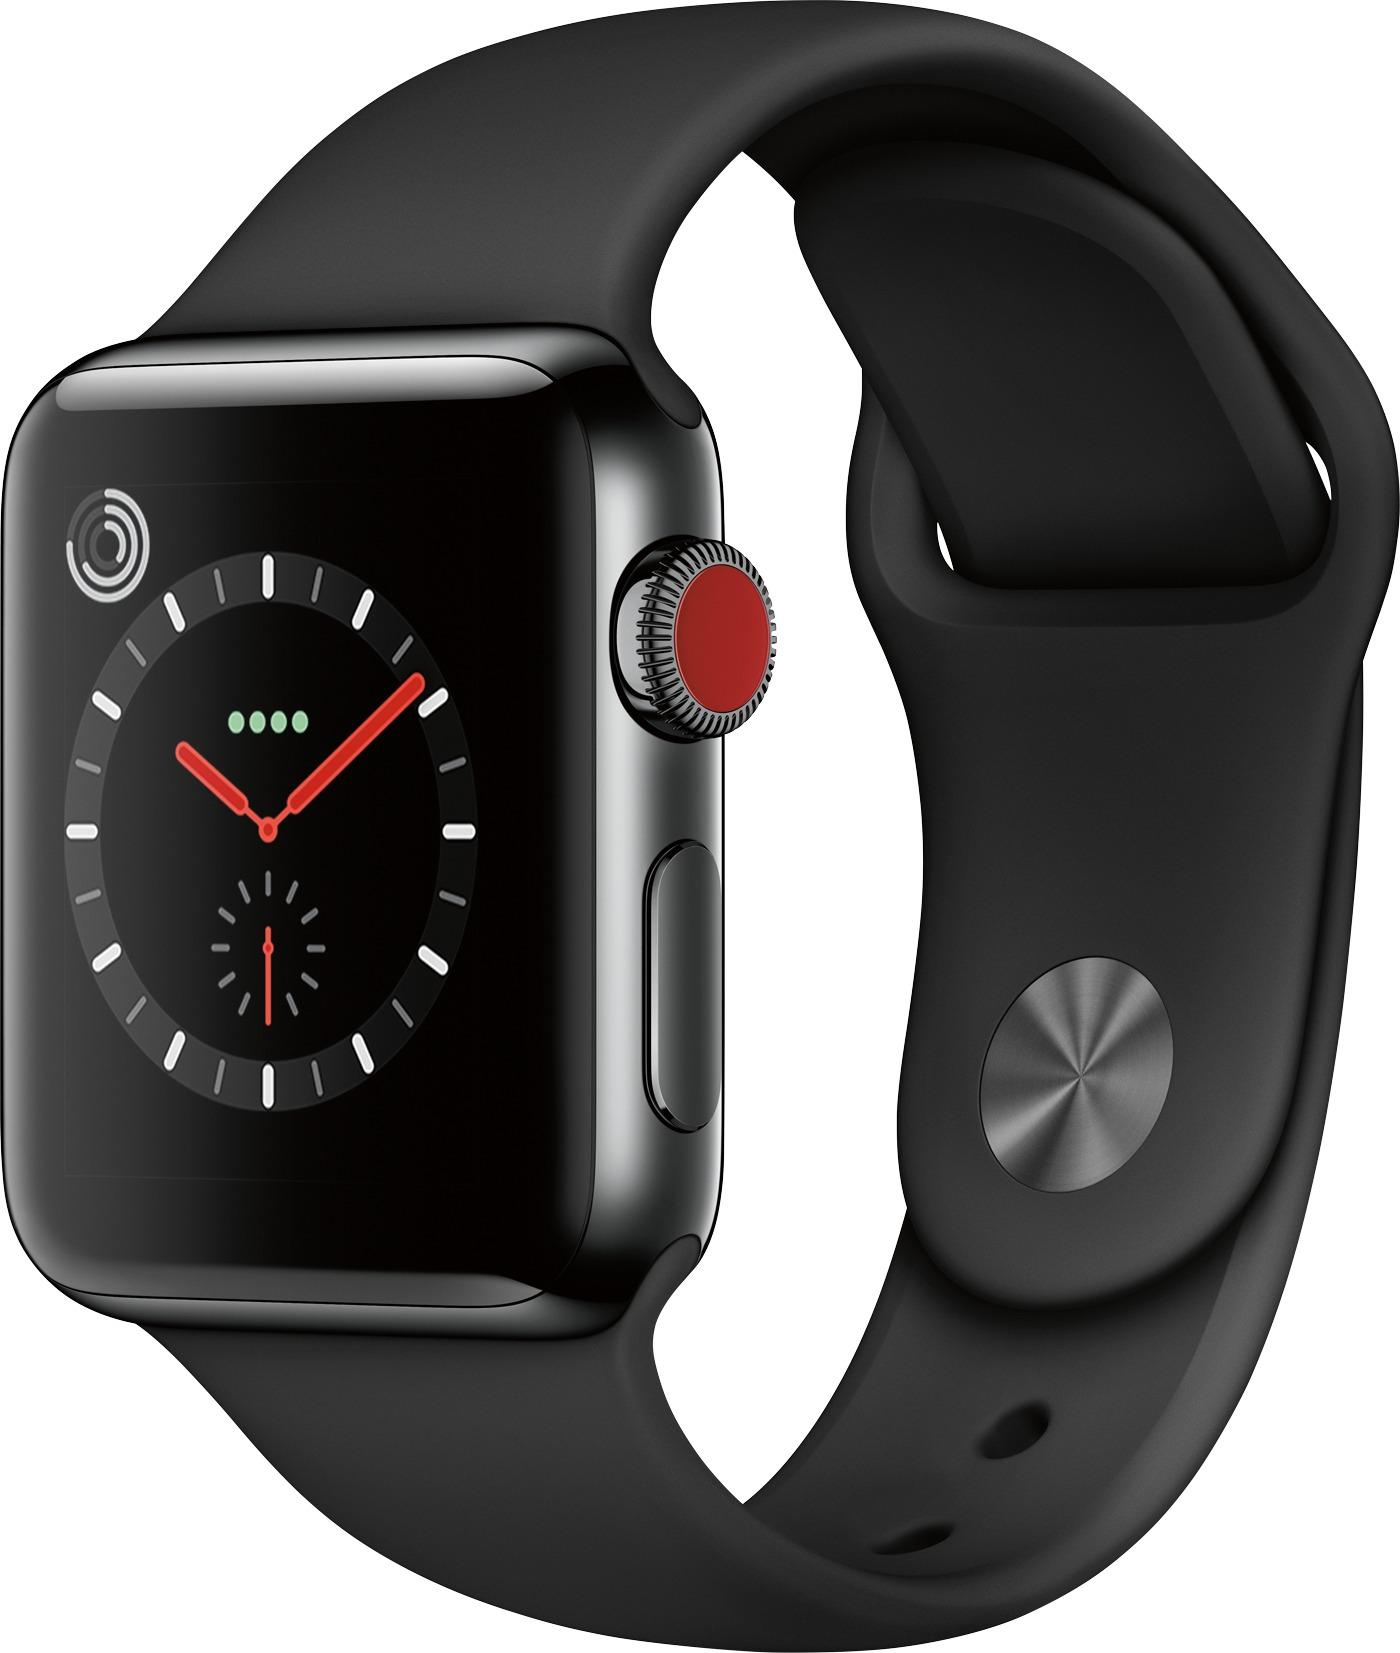 Questions and Answers: Apple Watch Series 3 (GPS + Cellular) 38mm Space Apple Watch Stainless Steel Gps Only